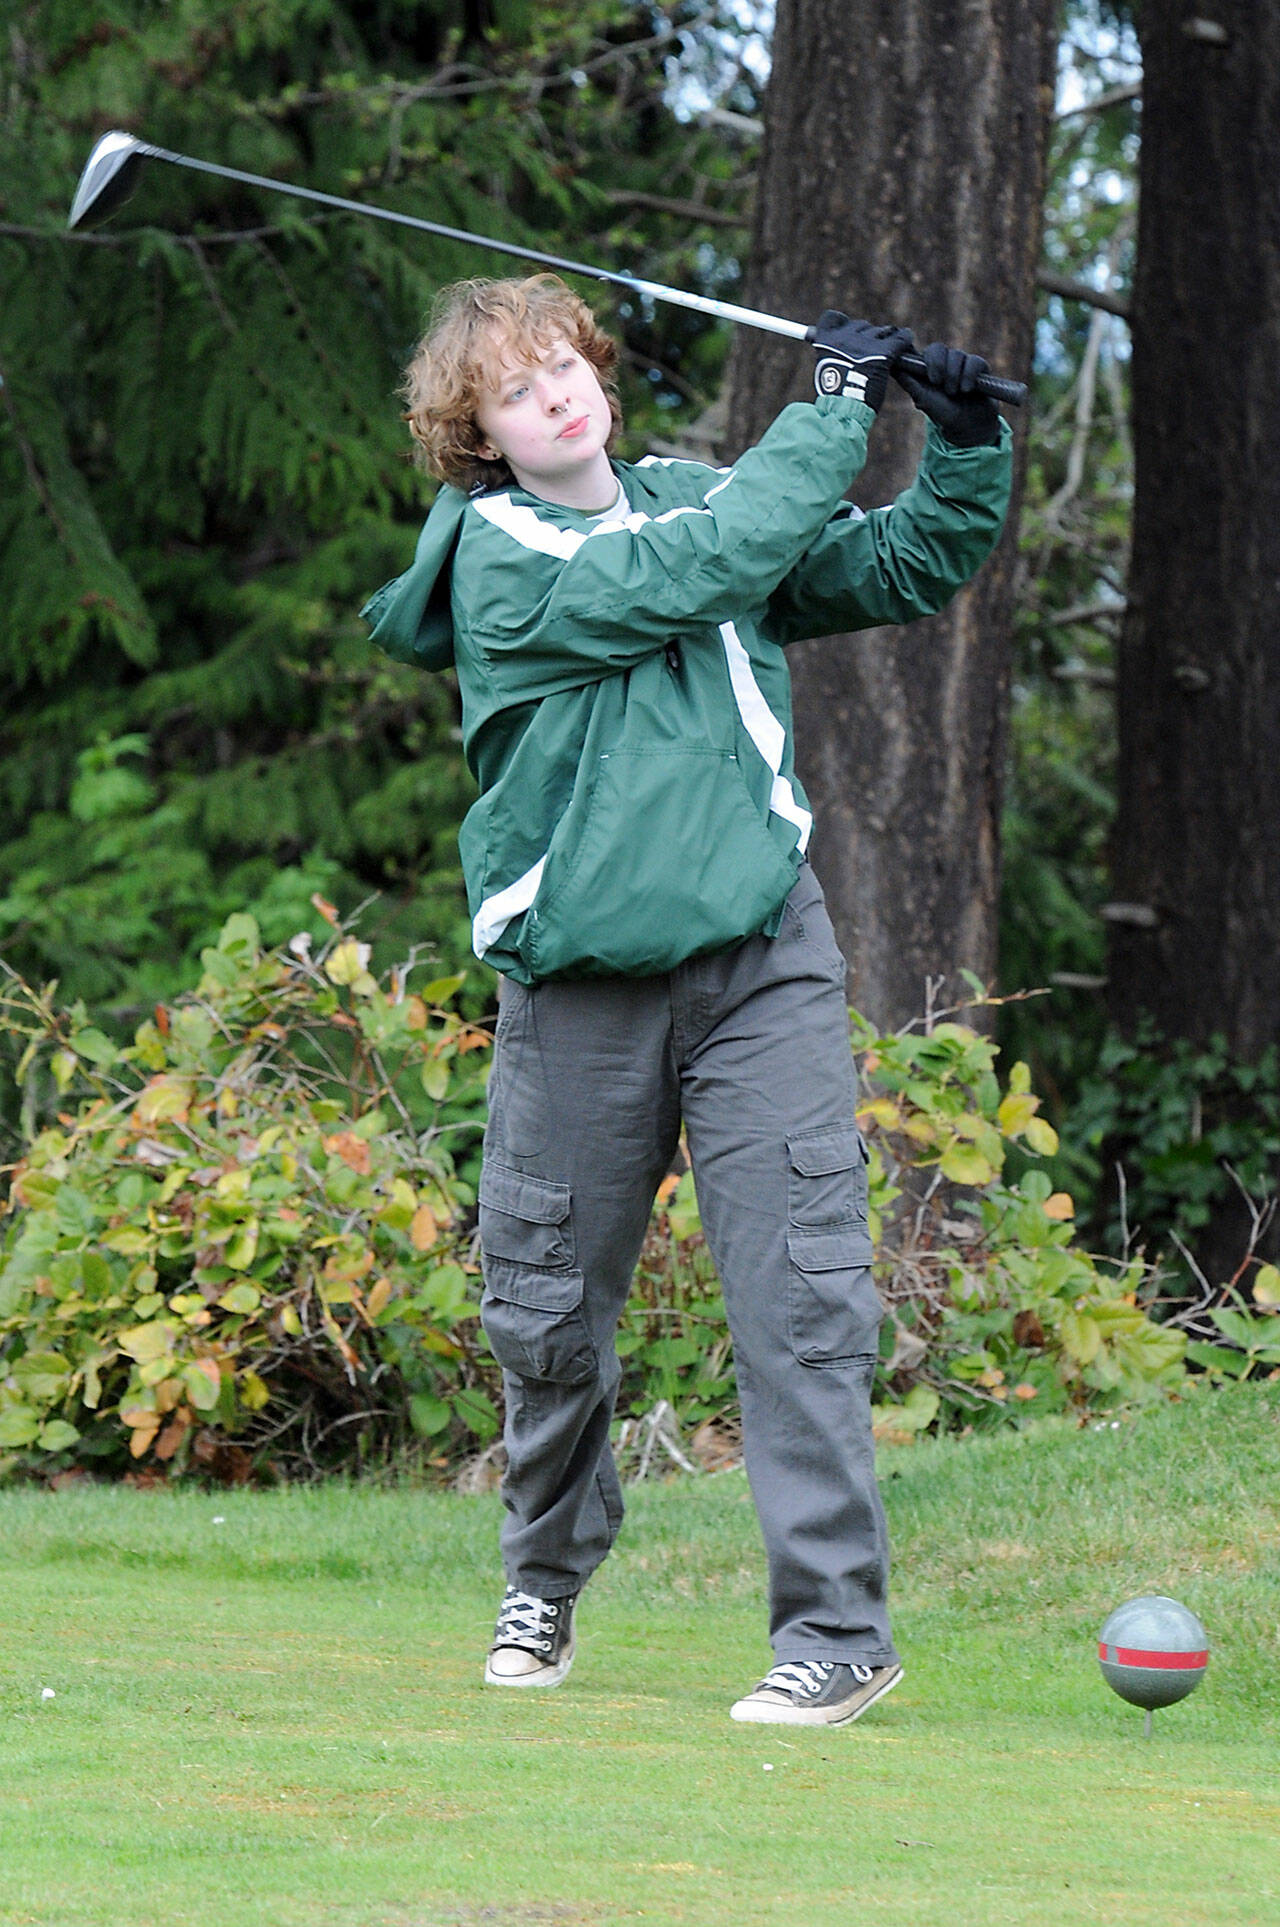 Port Angeles’ Lauryn Chapman tees off on the 16th hole during the Duke Streeter Memorial Invitational Tournament. on Tuesday at Peninsula Golf Club. (Keith Thorpe/Peninsula Daily News)
Port Angeles’ Lauryn Chapman tees off on the 16th hole during the Duke Streeter Memorial Invitational Tournament. on Tuesday at Peninsula Golf Club. (Keith Thorpe/Peninsula Daily News)